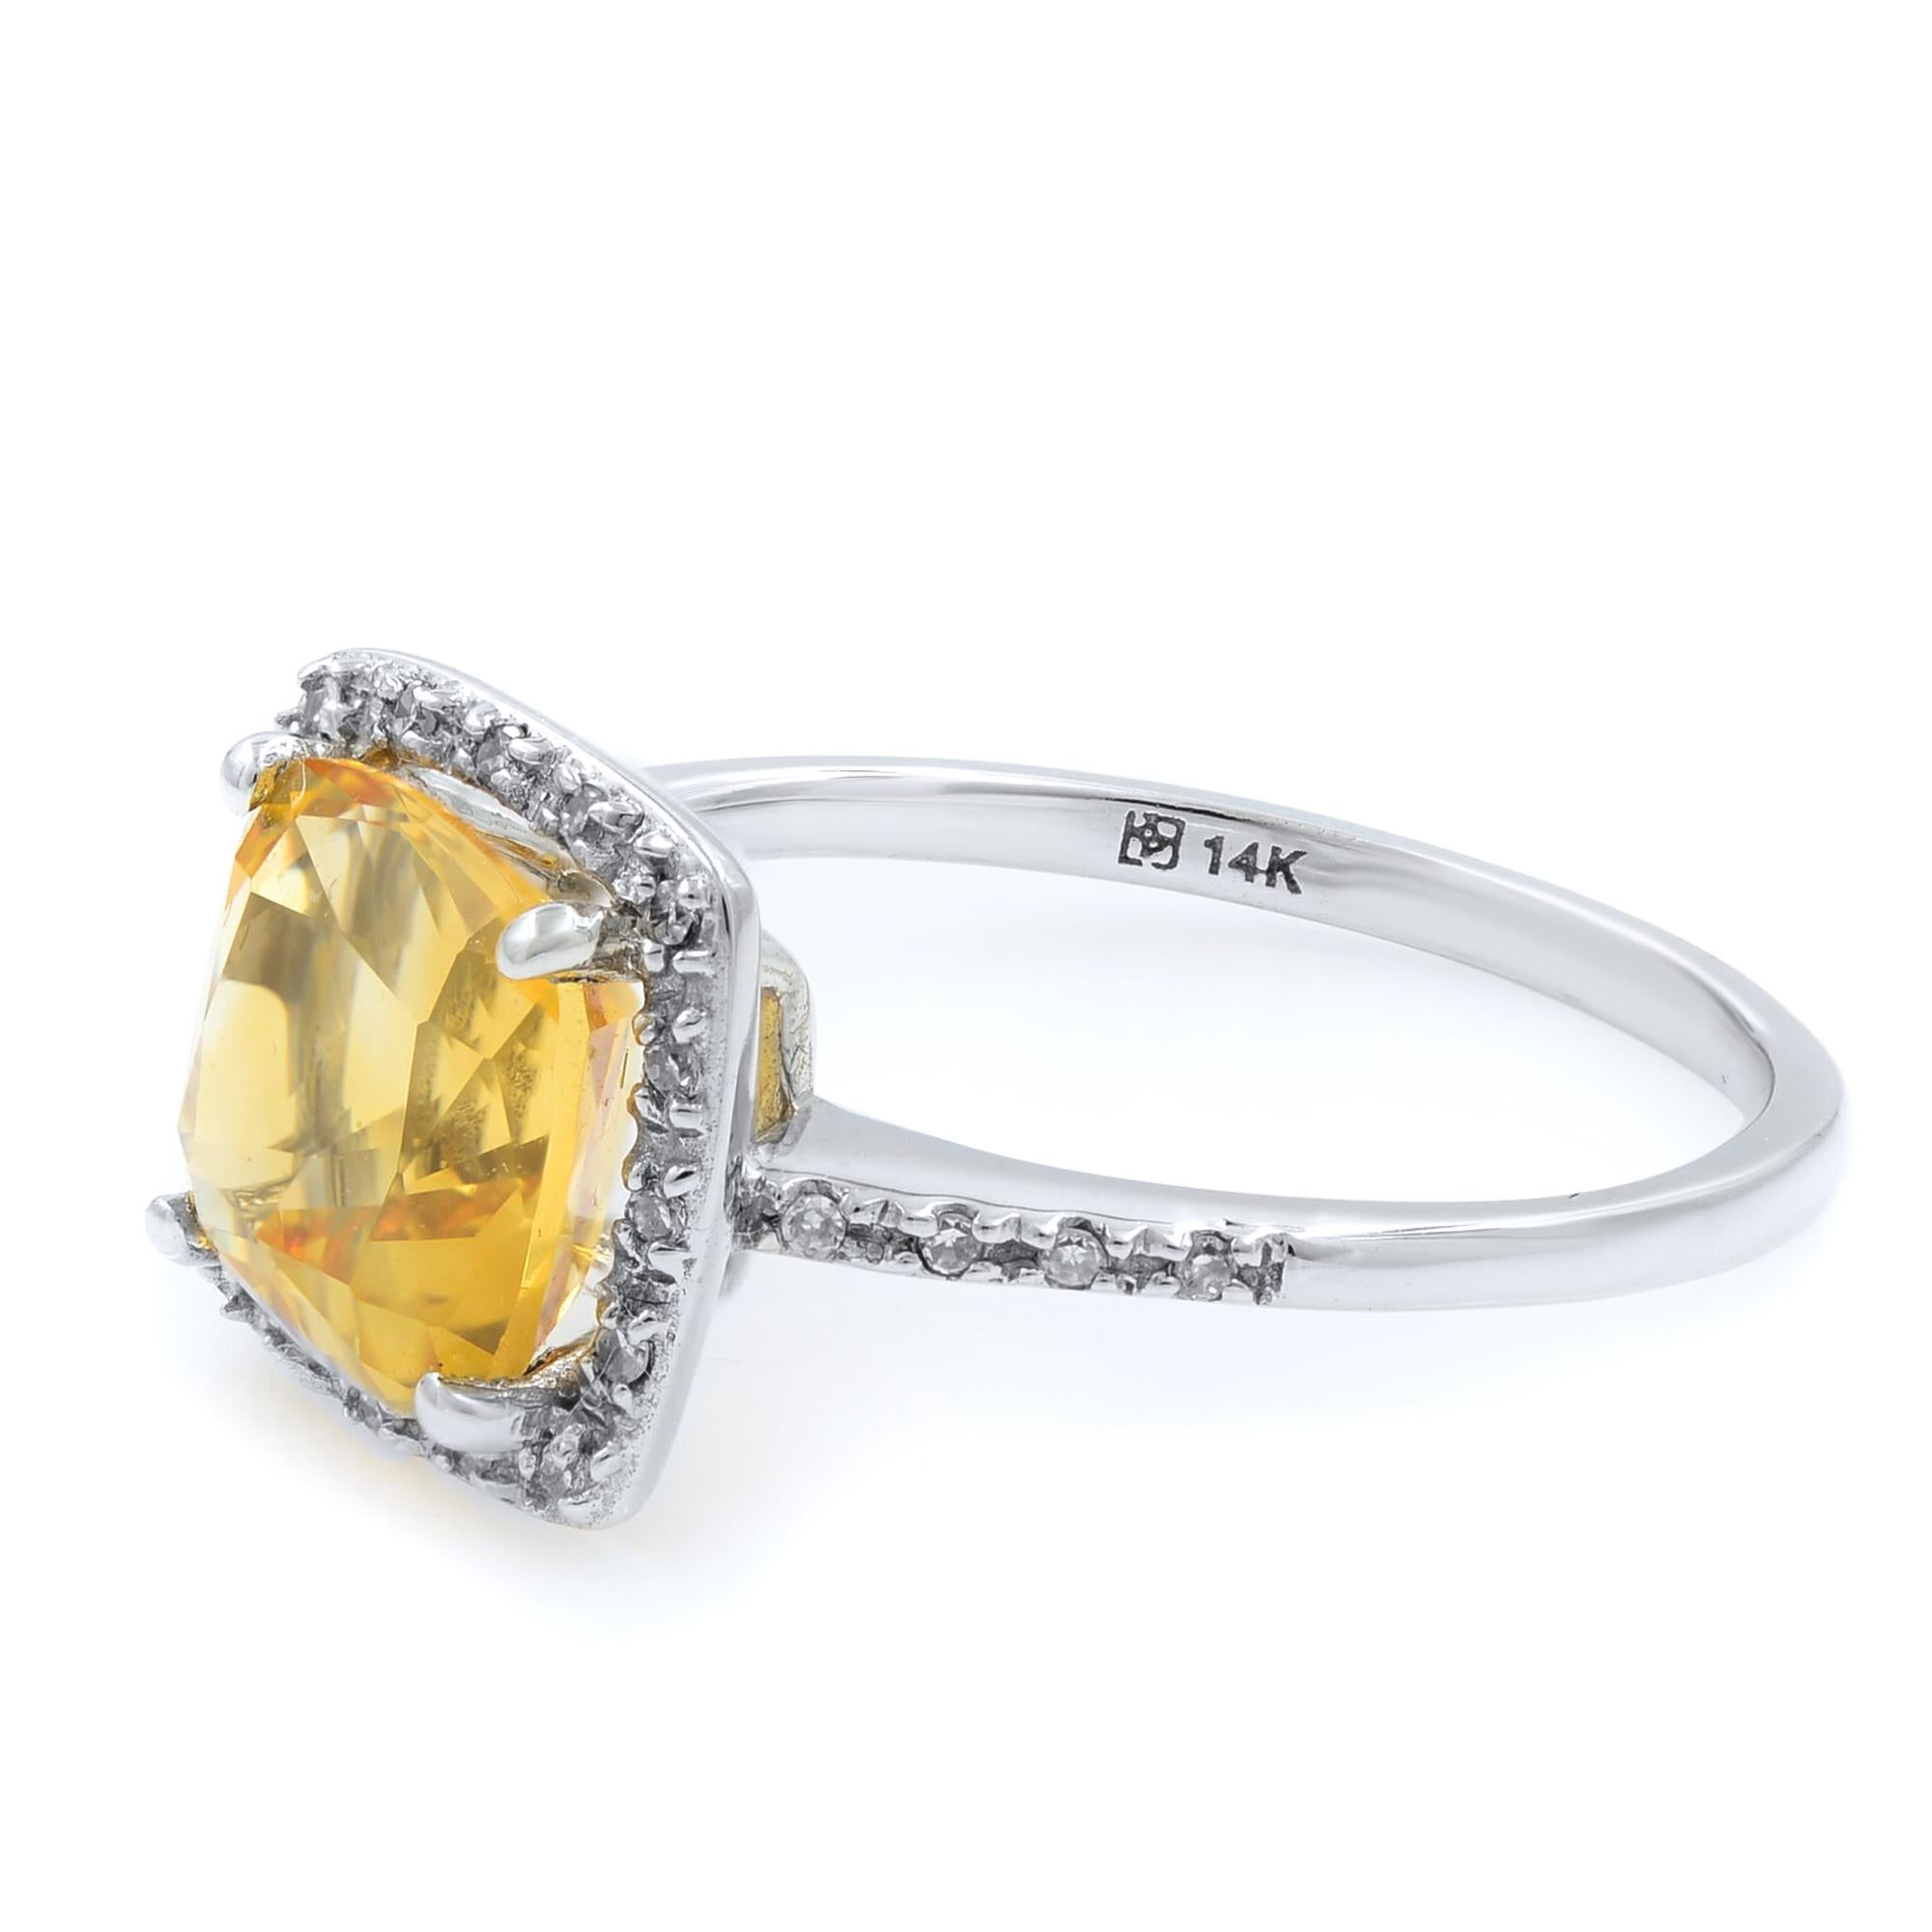 Rachel Koen Cushion Cut Citrine 2.7cttw Diamond Ring 14K White Gold In New Condition For Sale In New York, NY